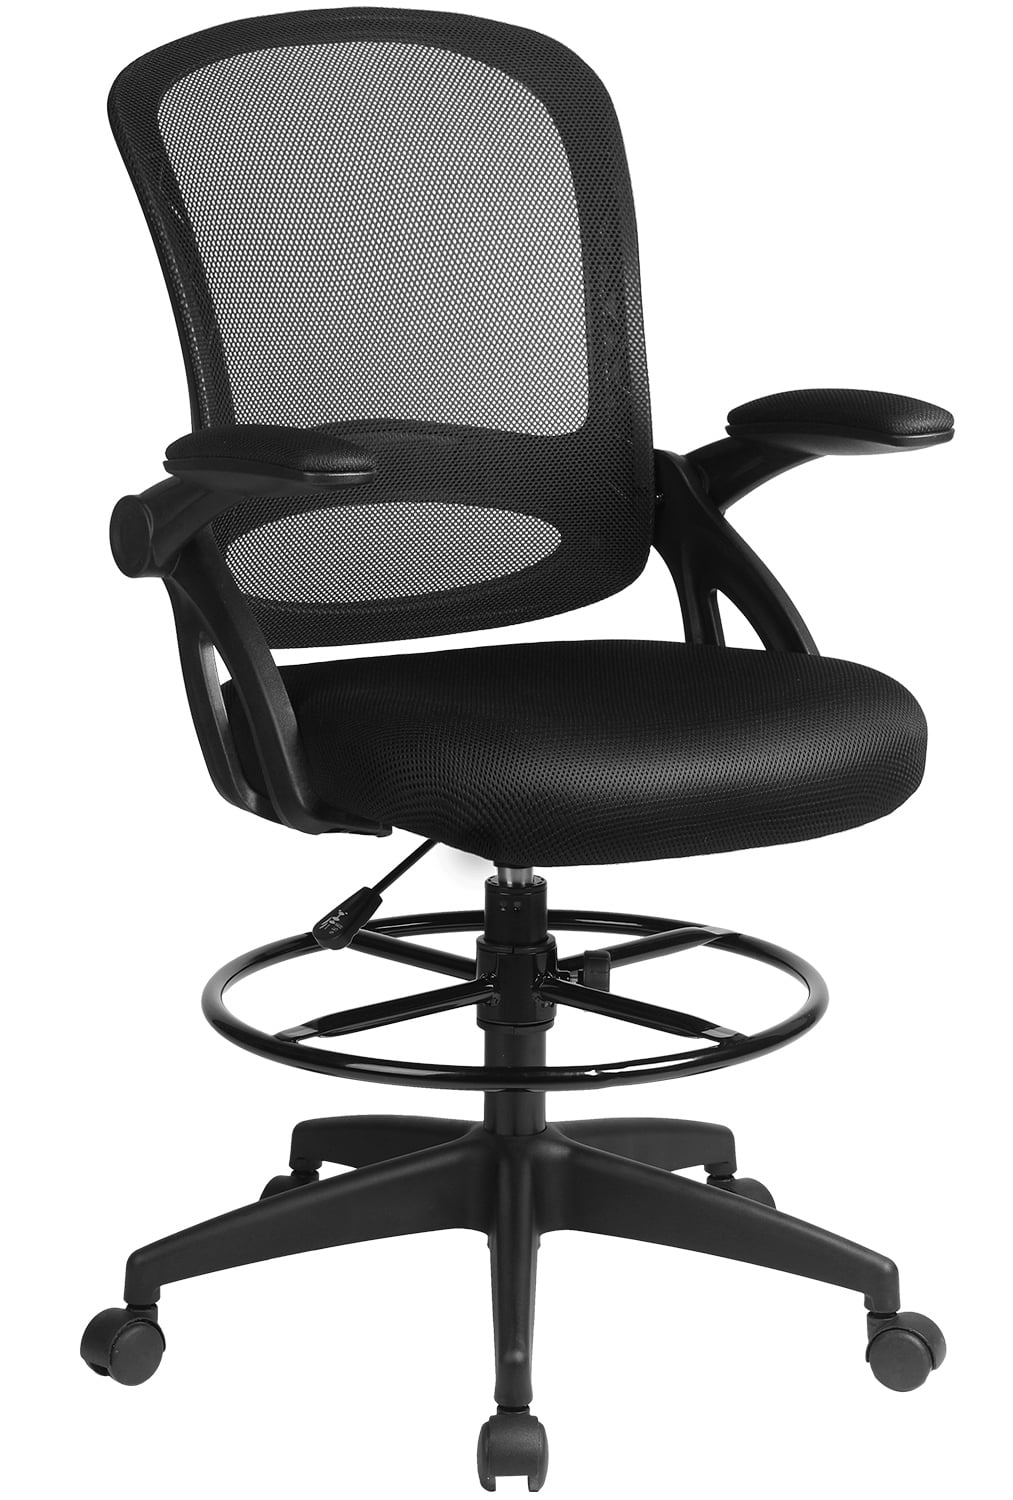 Grey Drafting Chair Tall Office Chair Mesh Ergonomic Mid-Back Desk Chair with Adjustable Foot Ring for Executive Computer Standing Desk 